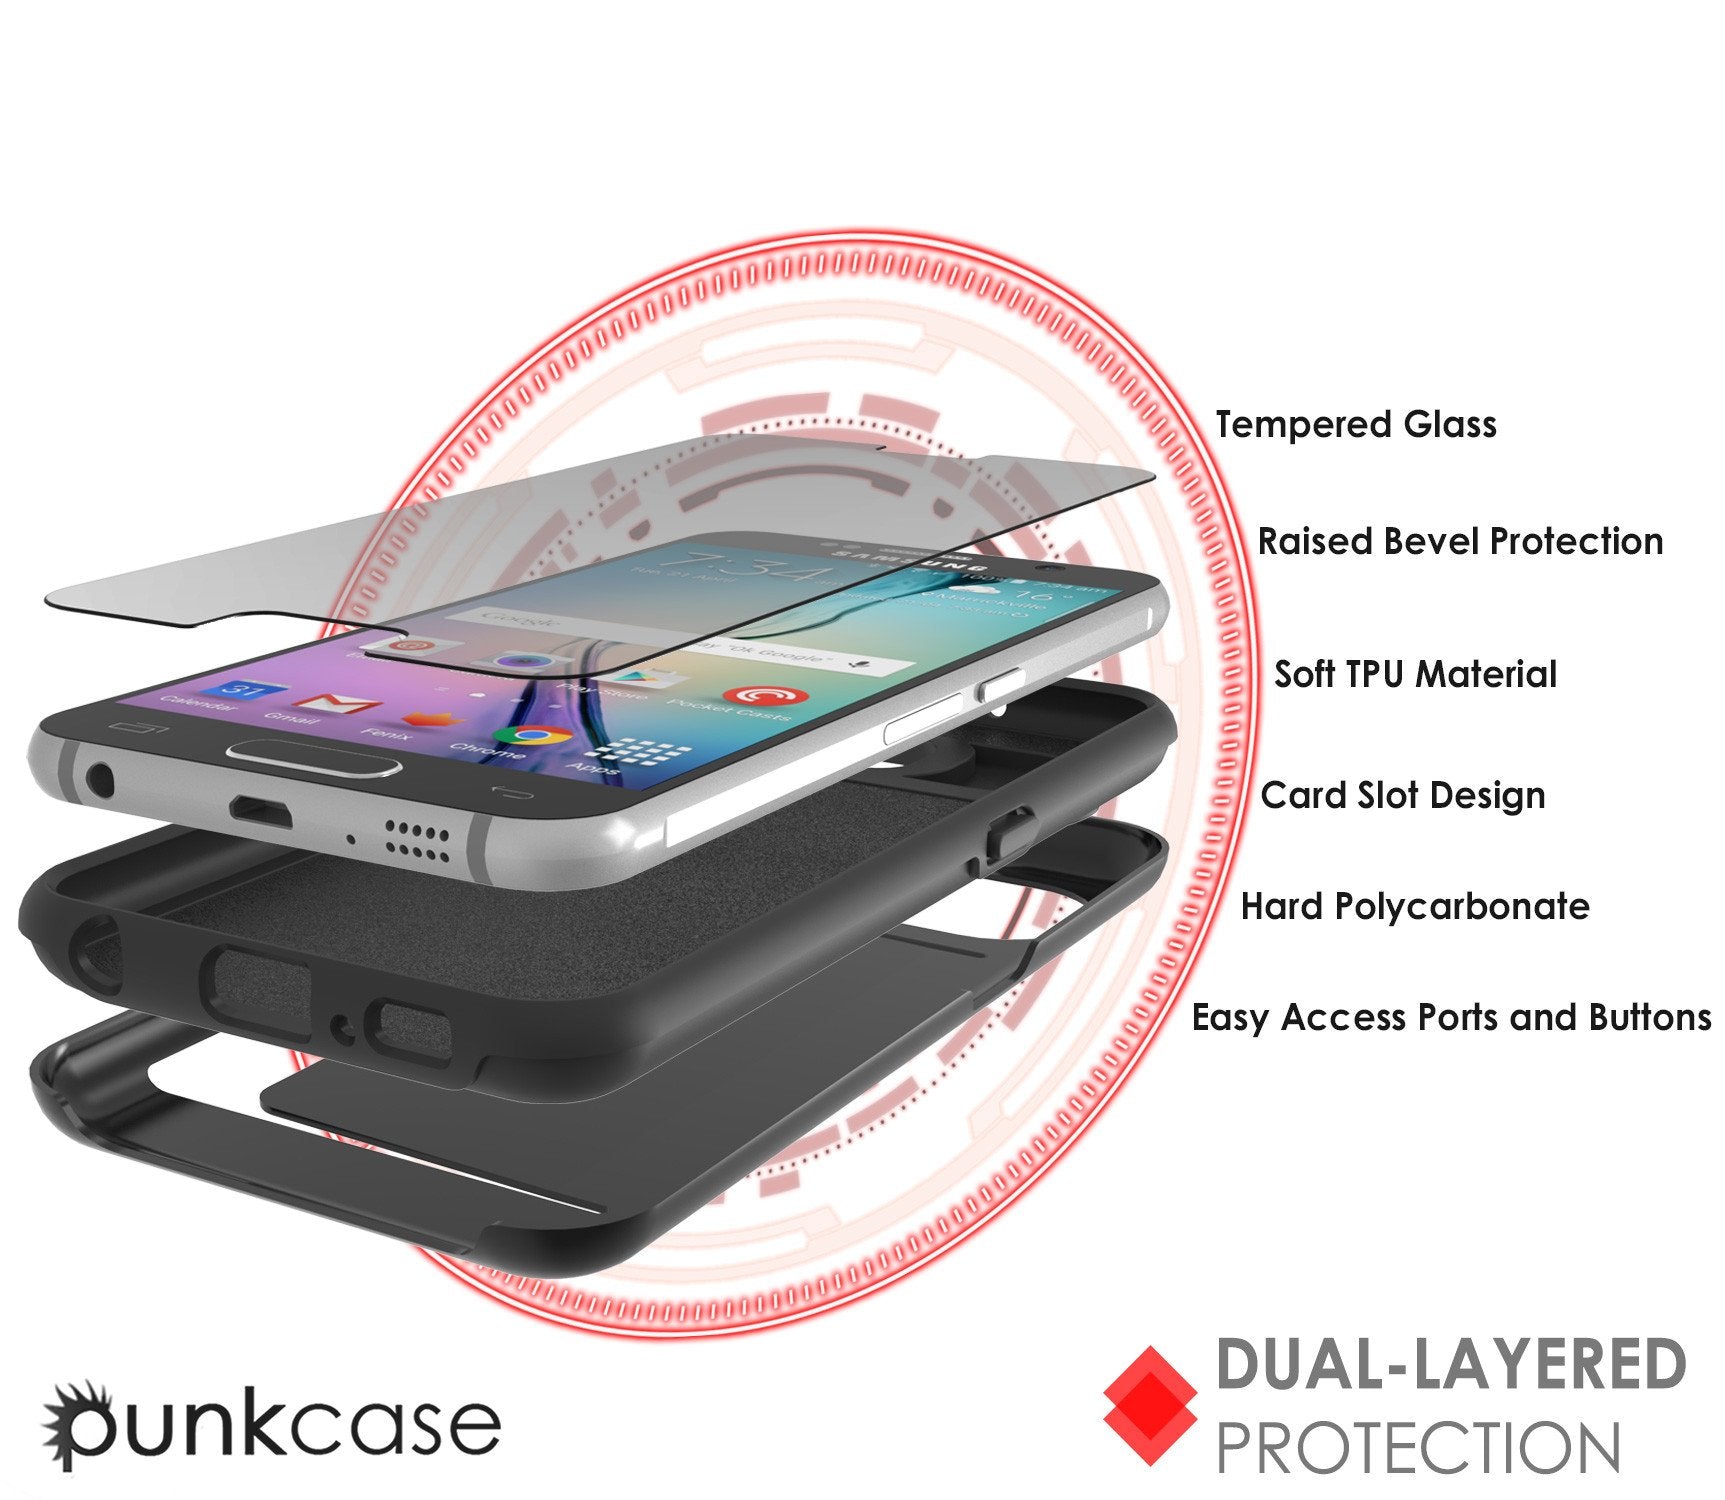 Galaxy s6 Case PunkCase CLUTCH Black Series Slim Armor Soft Cover Case w/ Tempered Glass